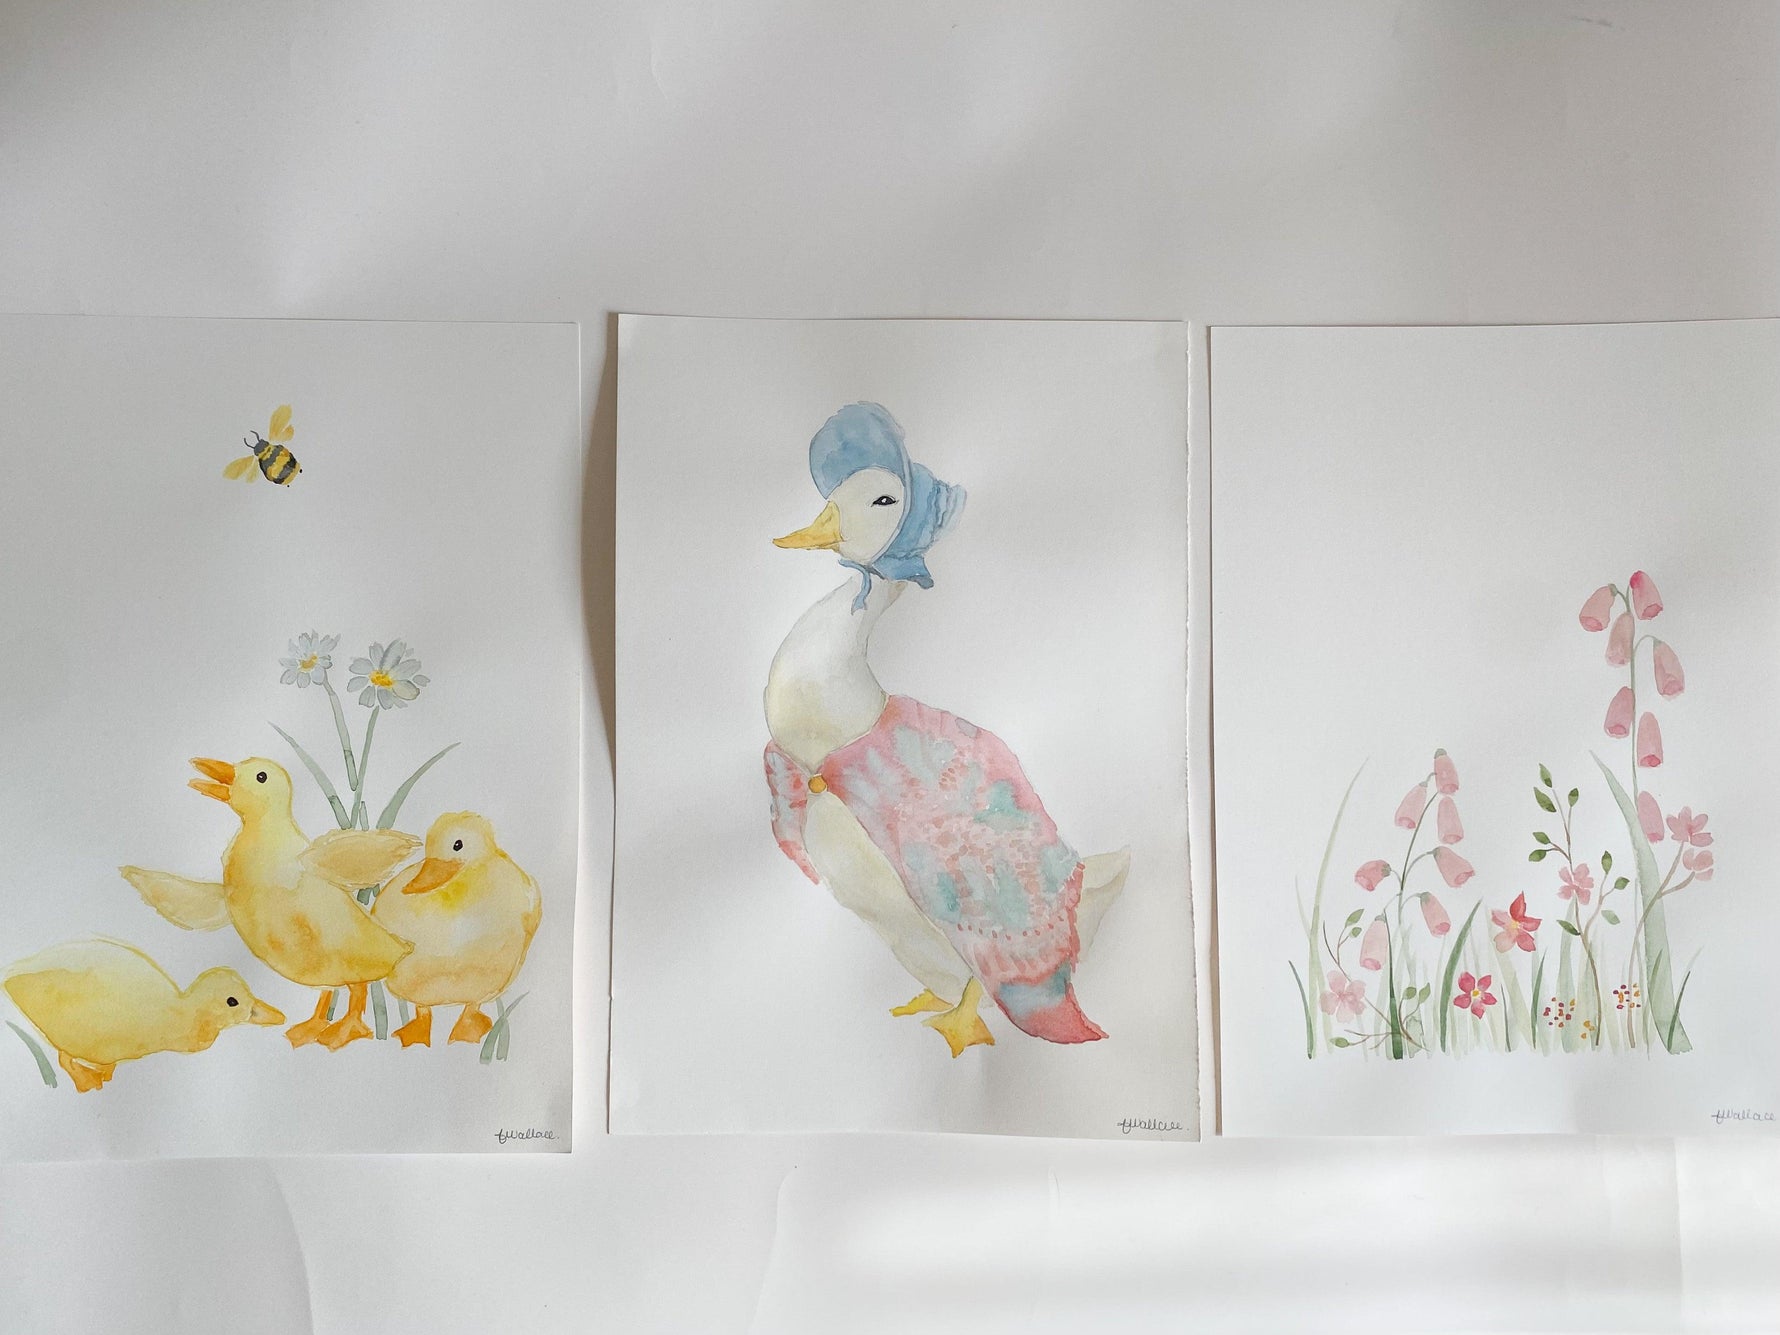 Jemima Puddleduck, Garden, and Ducklings - Set of 3 Original Watercolour Paintings - lovefrankieart